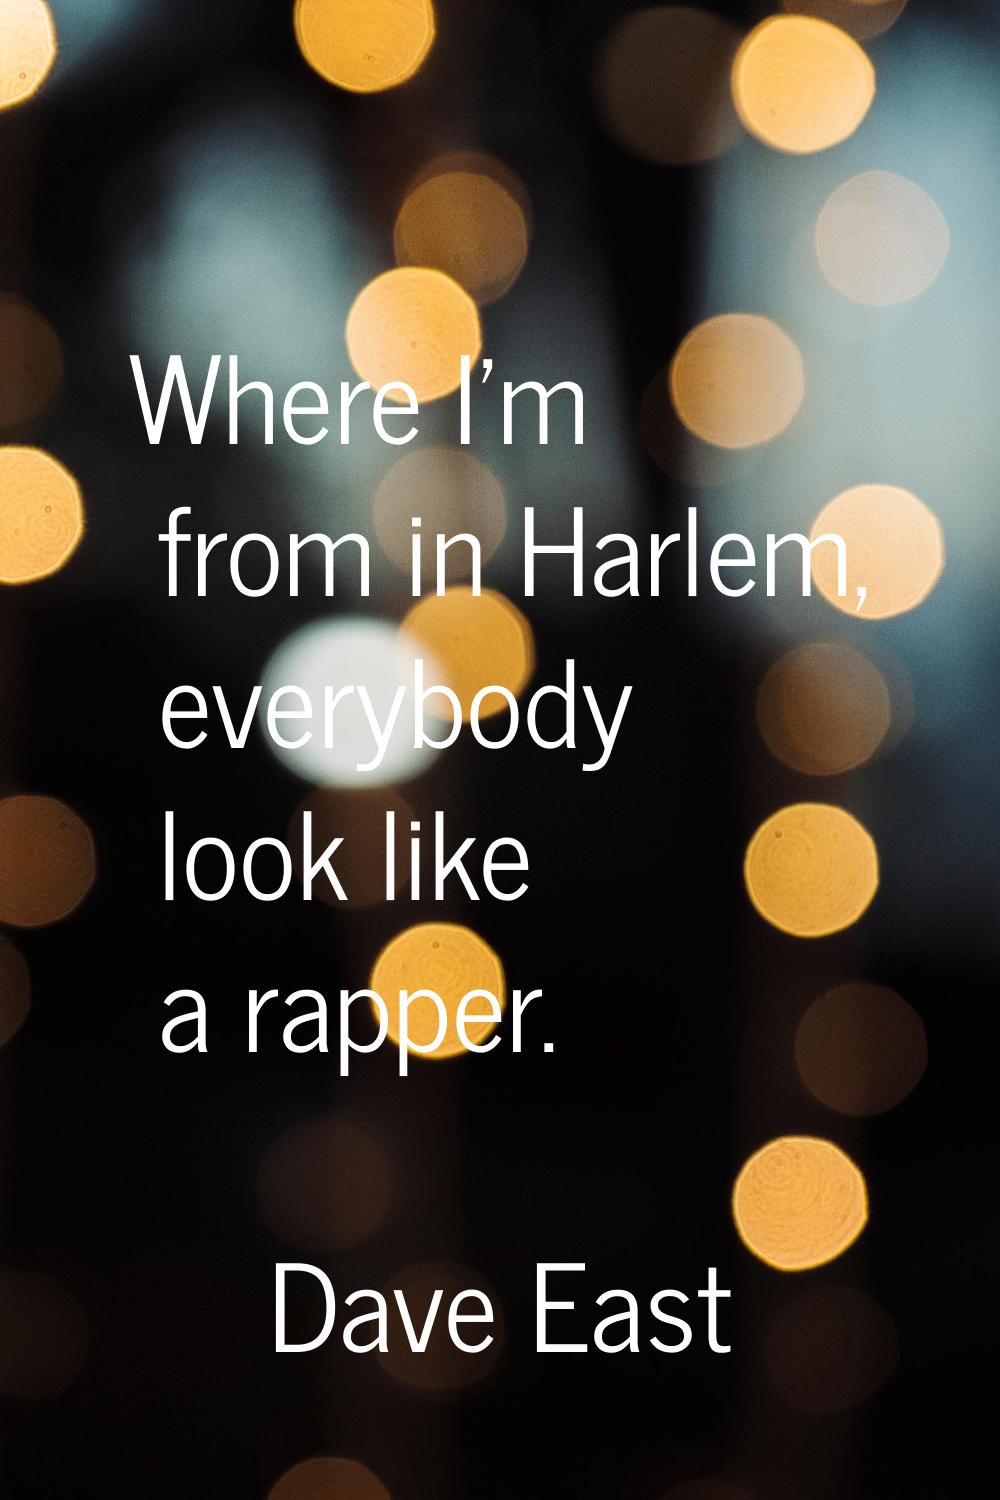 Where I'm from in Harlem, everybody look like a rapper.